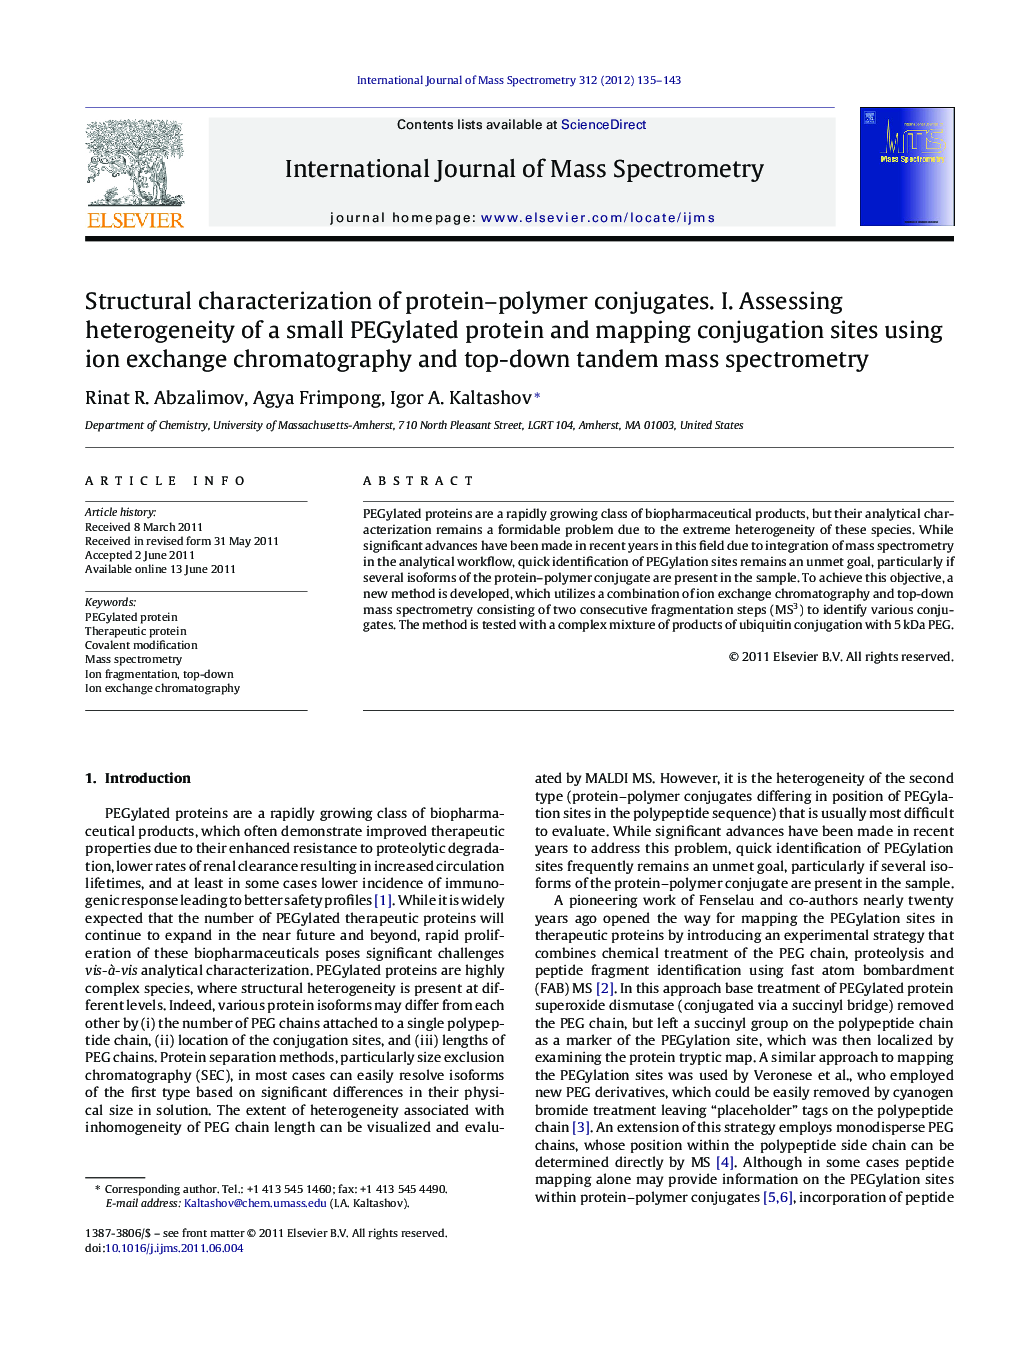 Structural characterization of protein–polymer conjugates. I. Assessing heterogeneity of a small PEGylated protein and mapping conjugation sites using ion exchange chromatography and top-down tandem mass spectrometry